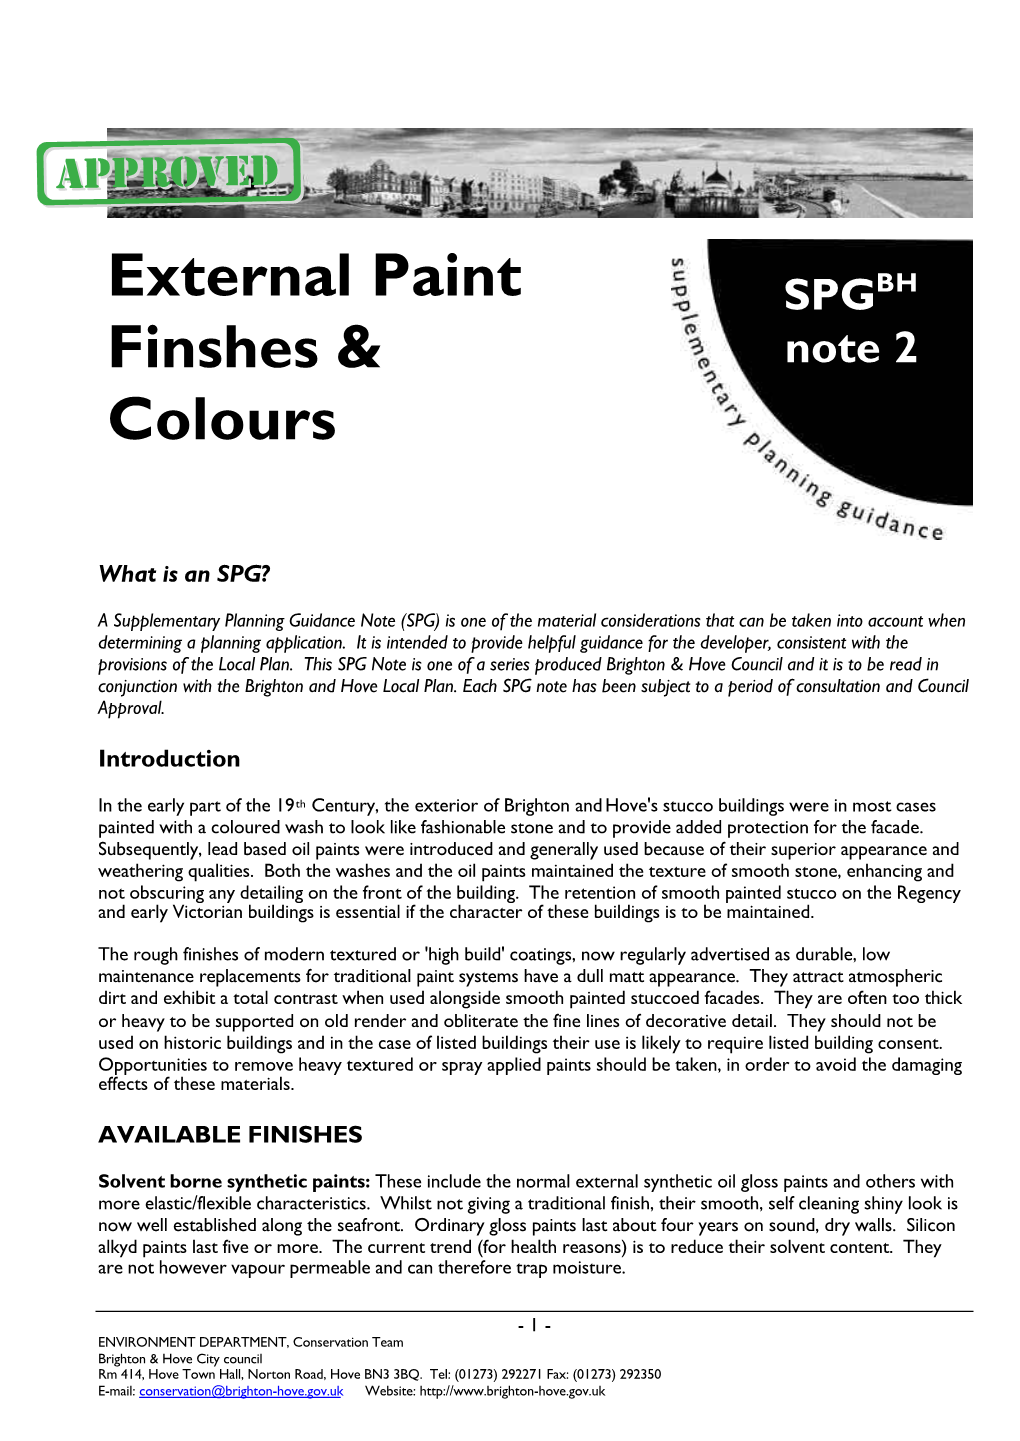 SPGBH2 External Paint Finishes and Colours